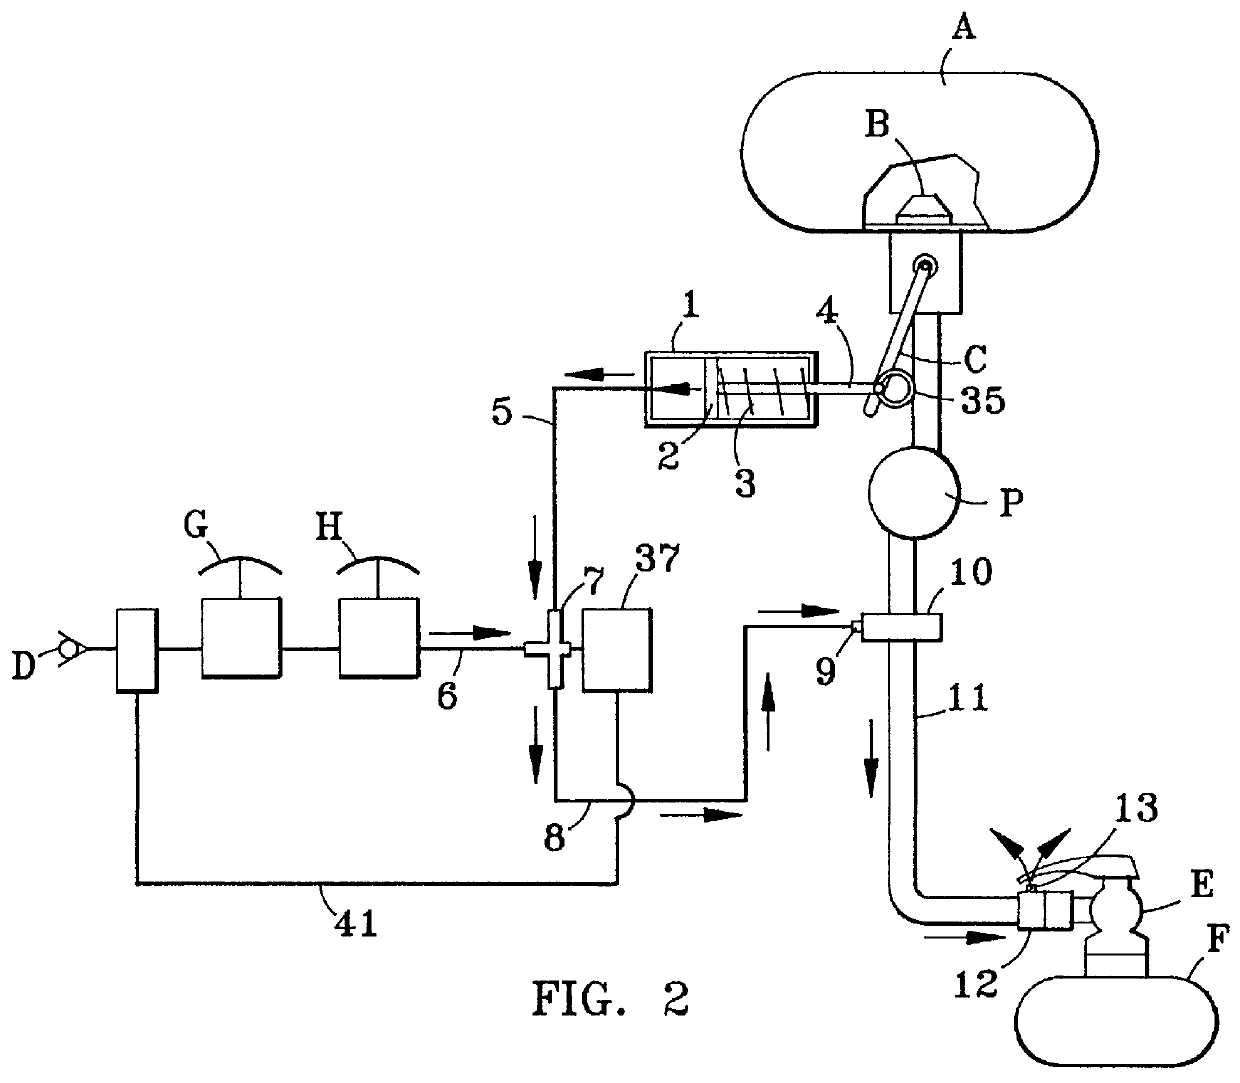 Multicannular fluid delivery system with pressure sensitive alarm